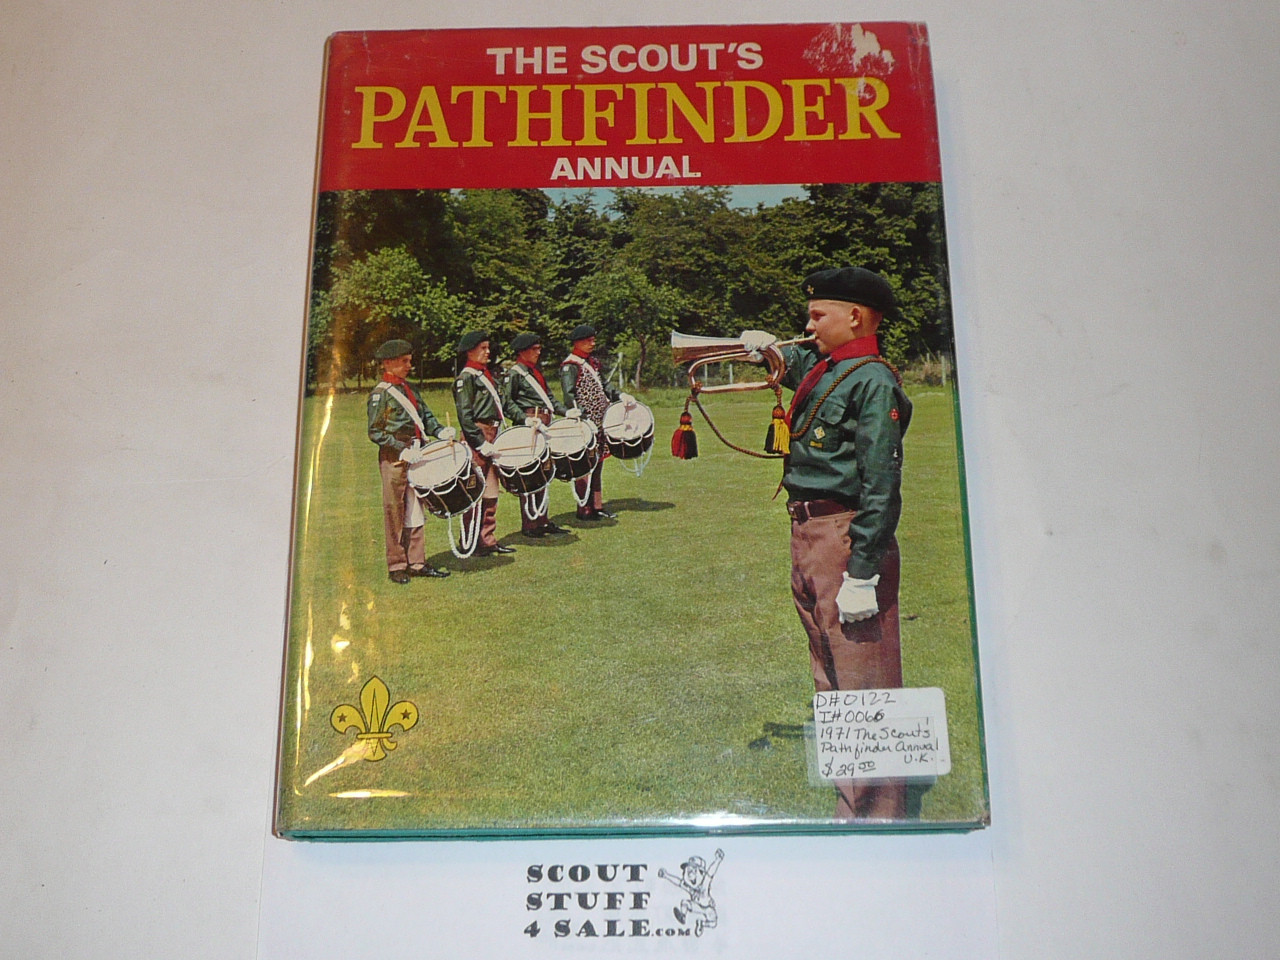 1971 The Scout's Pathfinder Annual, UK Scout Association, with dust jacket